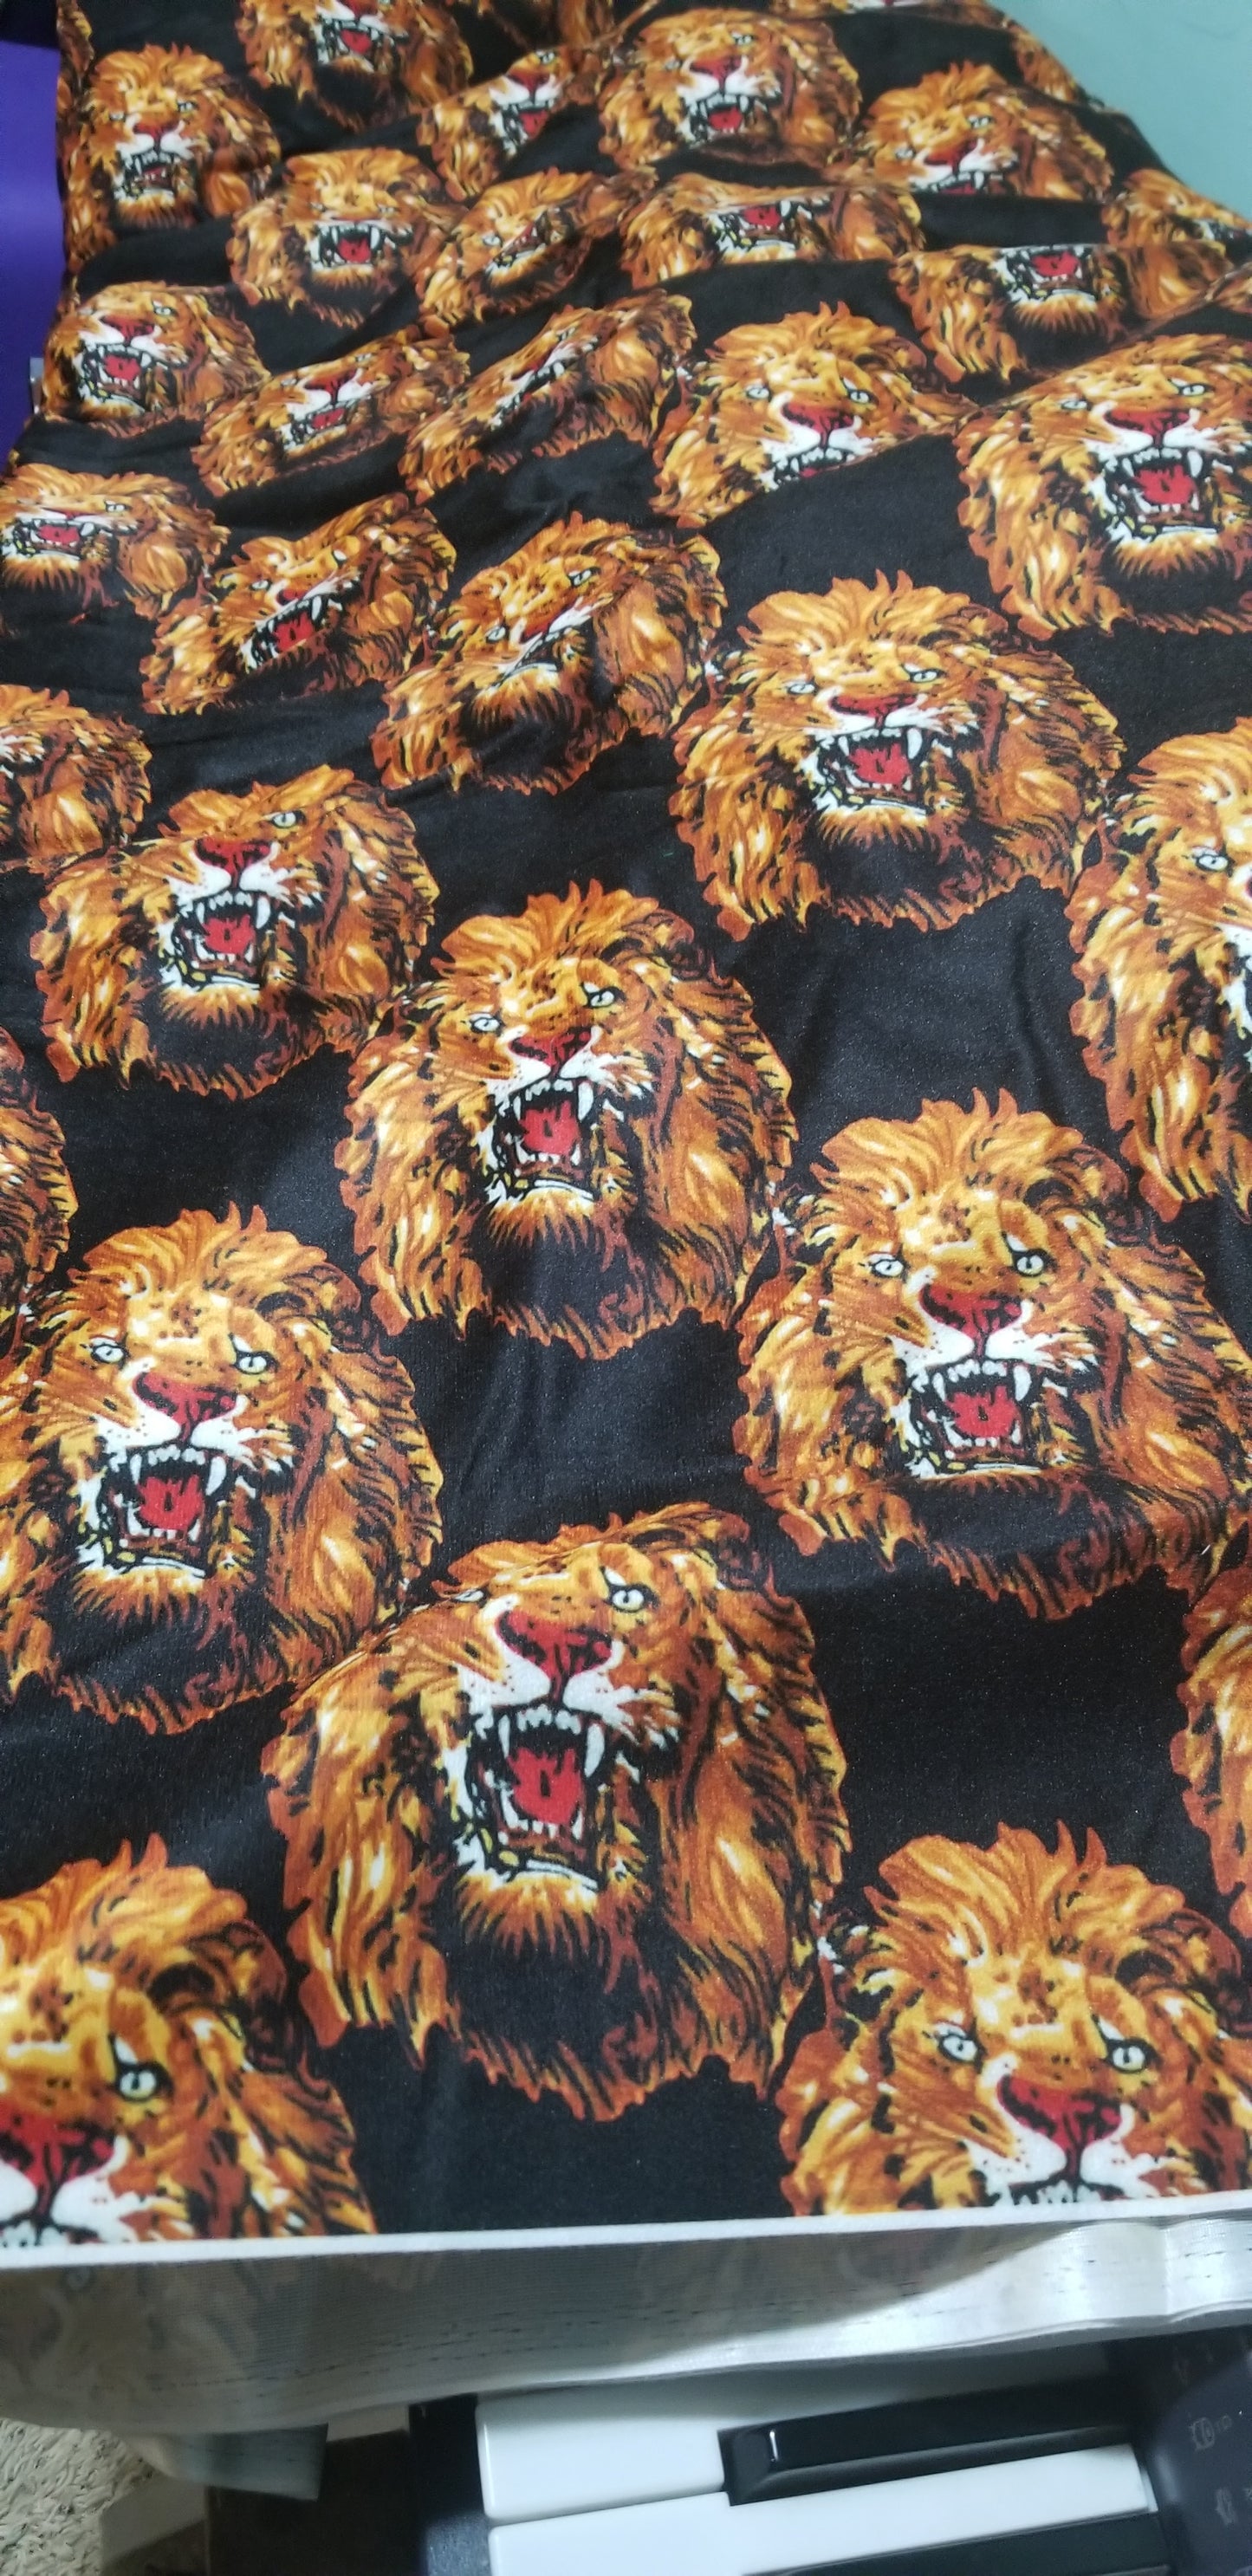 New arrival Isi-agu Igbo traditional/ceremonial fabric for men or womem. Lion head  print.  Sold per one yard. Price is for a yard. Can be use for wrapper, blouse or shirt for men. Black/Gold